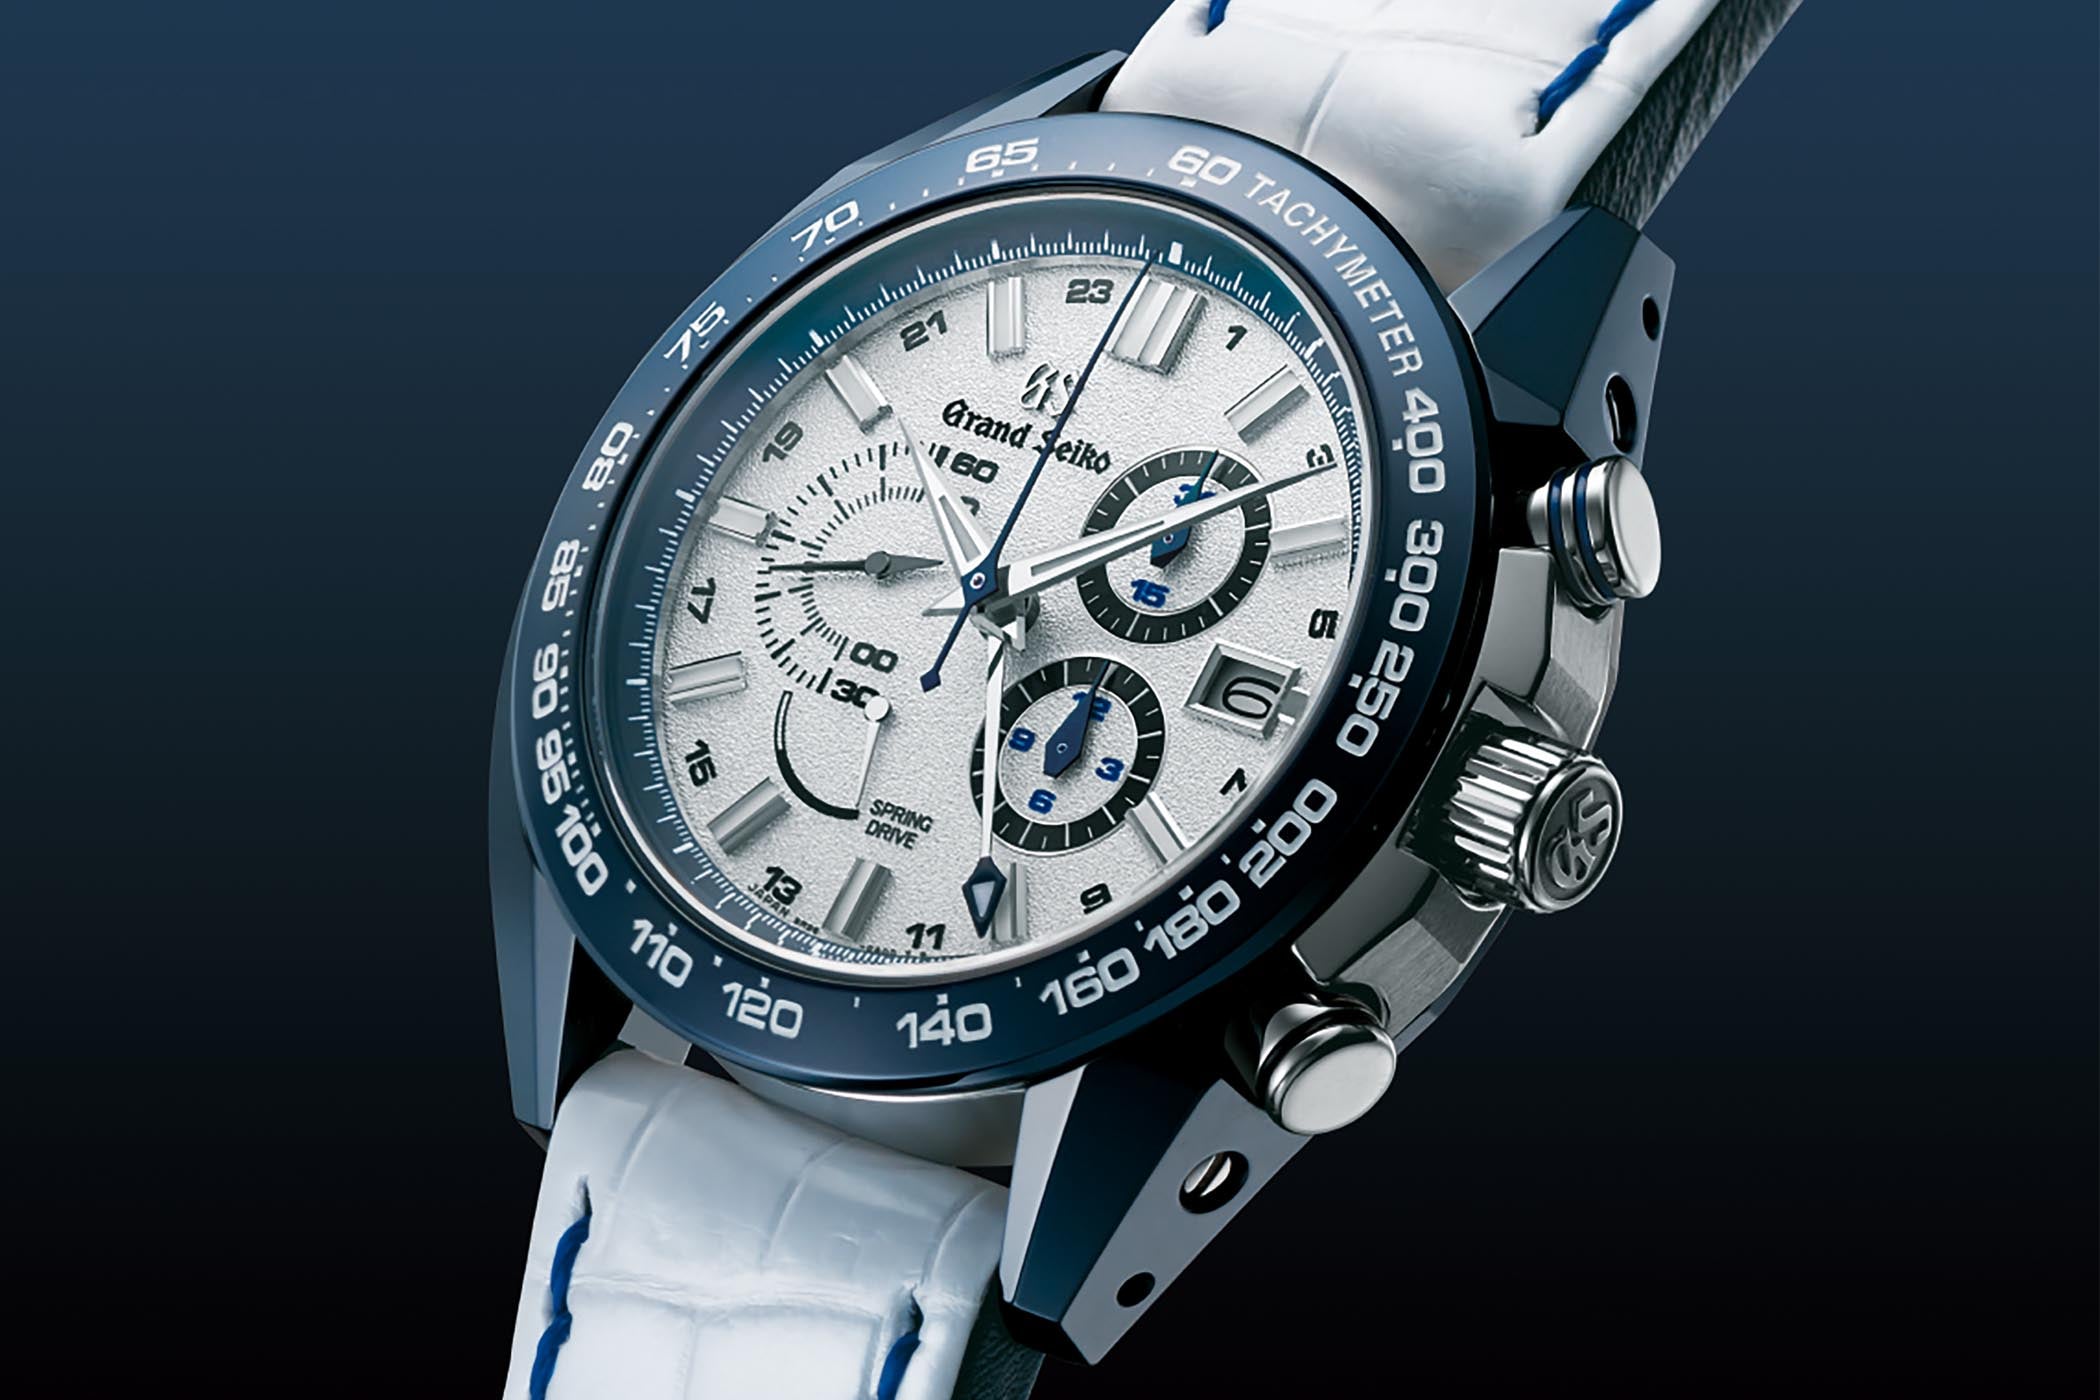 https://www.watchlounge.com/introducing-grand-seiko-spring-drive-chronograph-sbgc229-celebrating-20-years-of-spring-drive-and-50-years-of-nissan-gt-r/